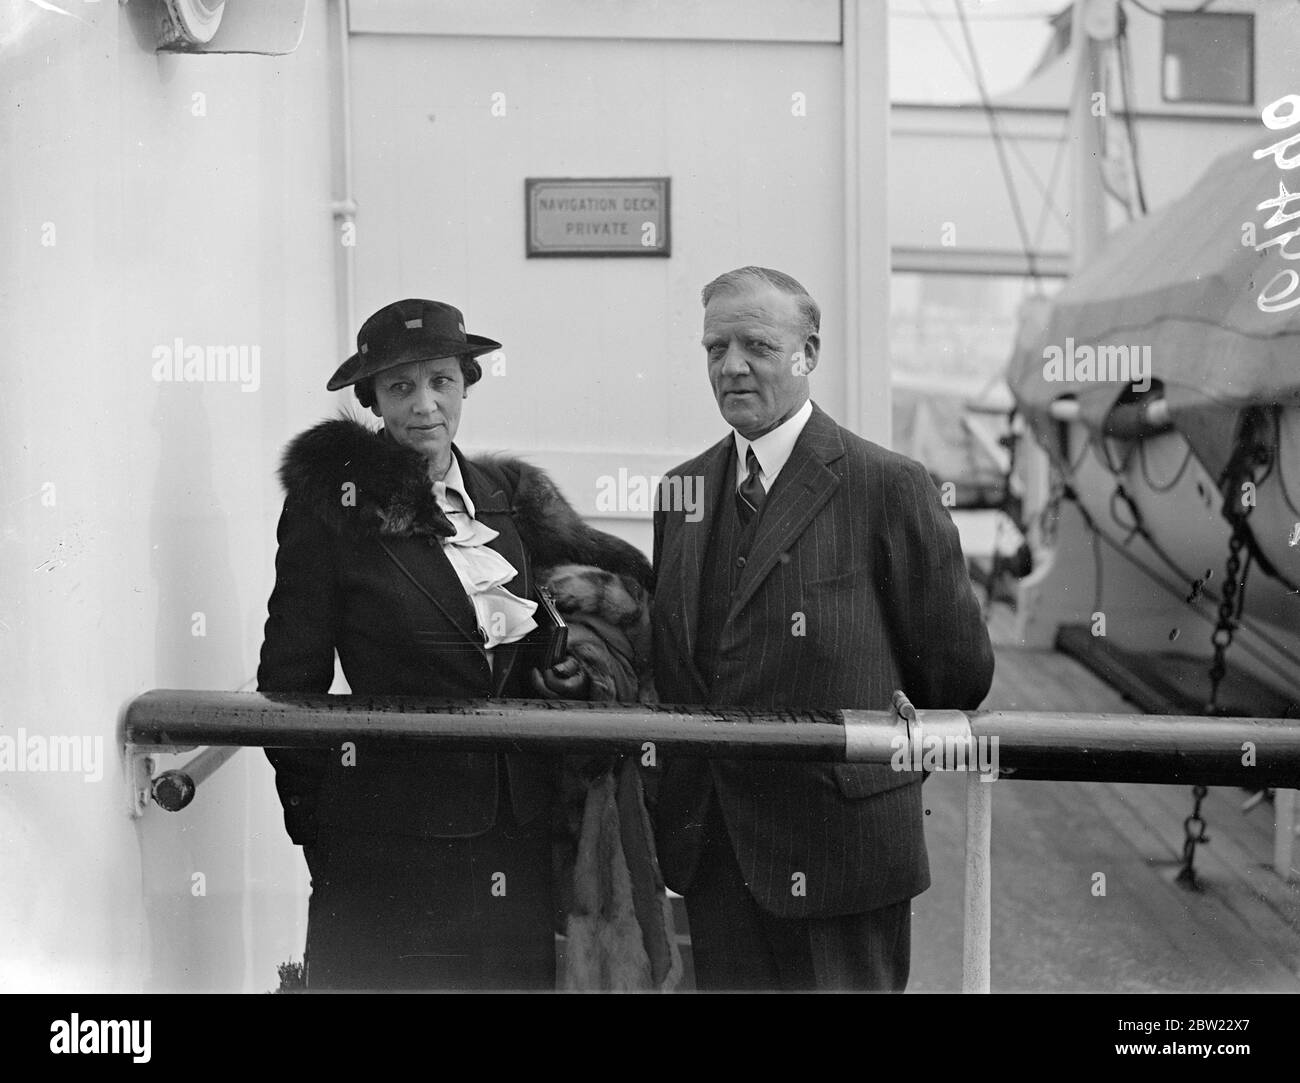 Mayor and Mayoress of Cape Town, arrived in England to name new liner. The Mayor of Cape Town, councillor J D Low, and their Mayoress, Mrs Low, arrived at Southampton on the 'Edinburgh Castle'to take part in the naming ceremony of the new Union Castle liner 'Capetown Castle' when she is launched from the Belfast yards of Harland and Wolff 23. September. Photo shows, the Mayor and Mayoress of Cape Town, councillor and Mrs J D Low, on arrival at Southampton. 20 September 1937 Stock Photo